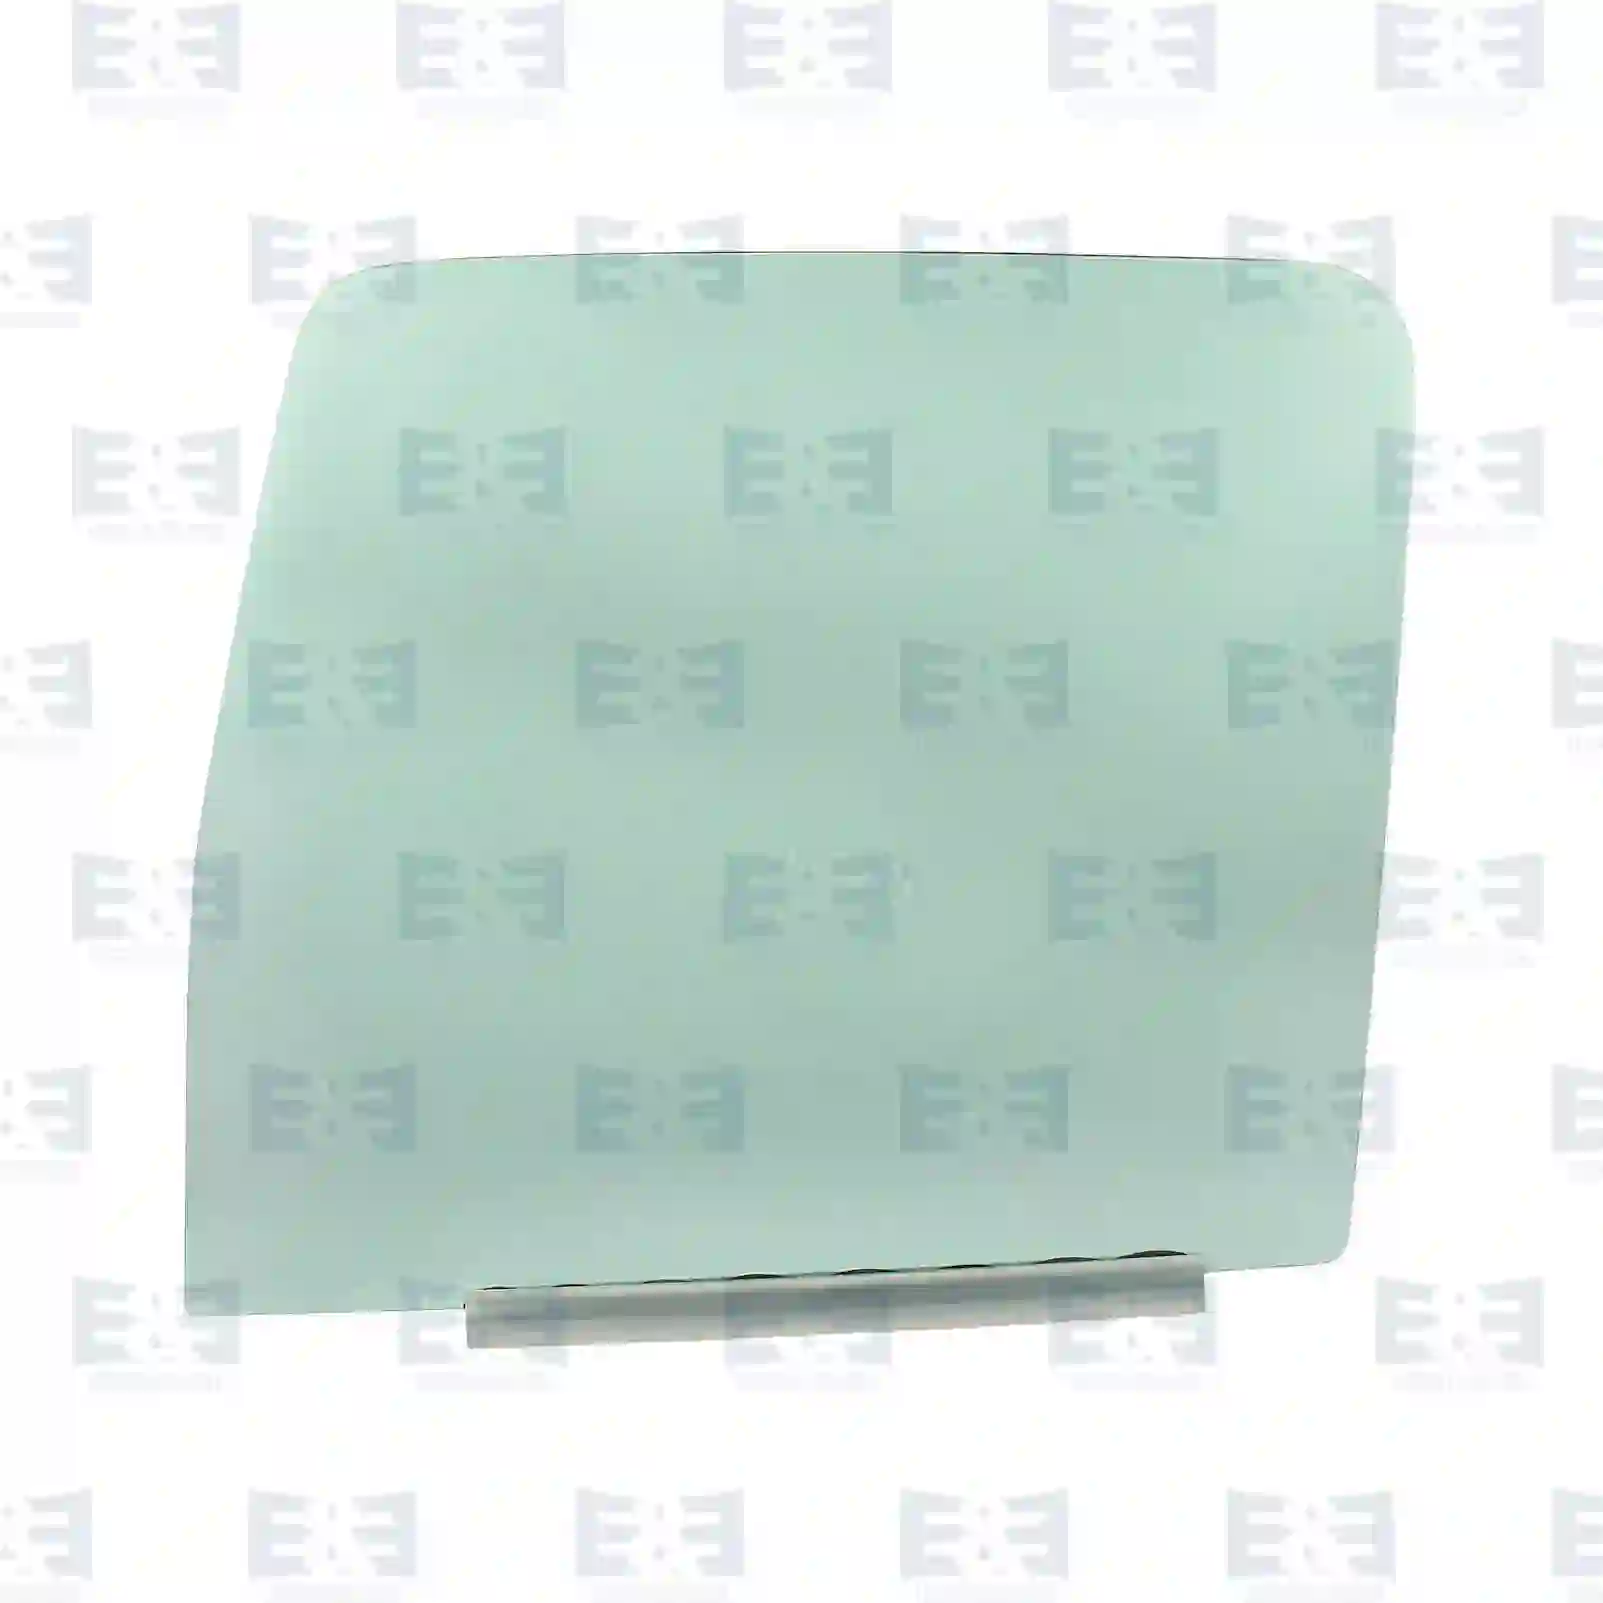 Door glass, tinted green, left, single package, 2E2291618, 0007200018S, ZG60558-0008 ||  2E2291618 E&E Truck Spare Parts | Truck Spare Parts, Auotomotive Spare Parts Door glass, tinted green, left, single package, 2E2291618, 0007200018S, ZG60558-0008 ||  2E2291618 E&E Truck Spare Parts | Truck Spare Parts, Auotomotive Spare Parts